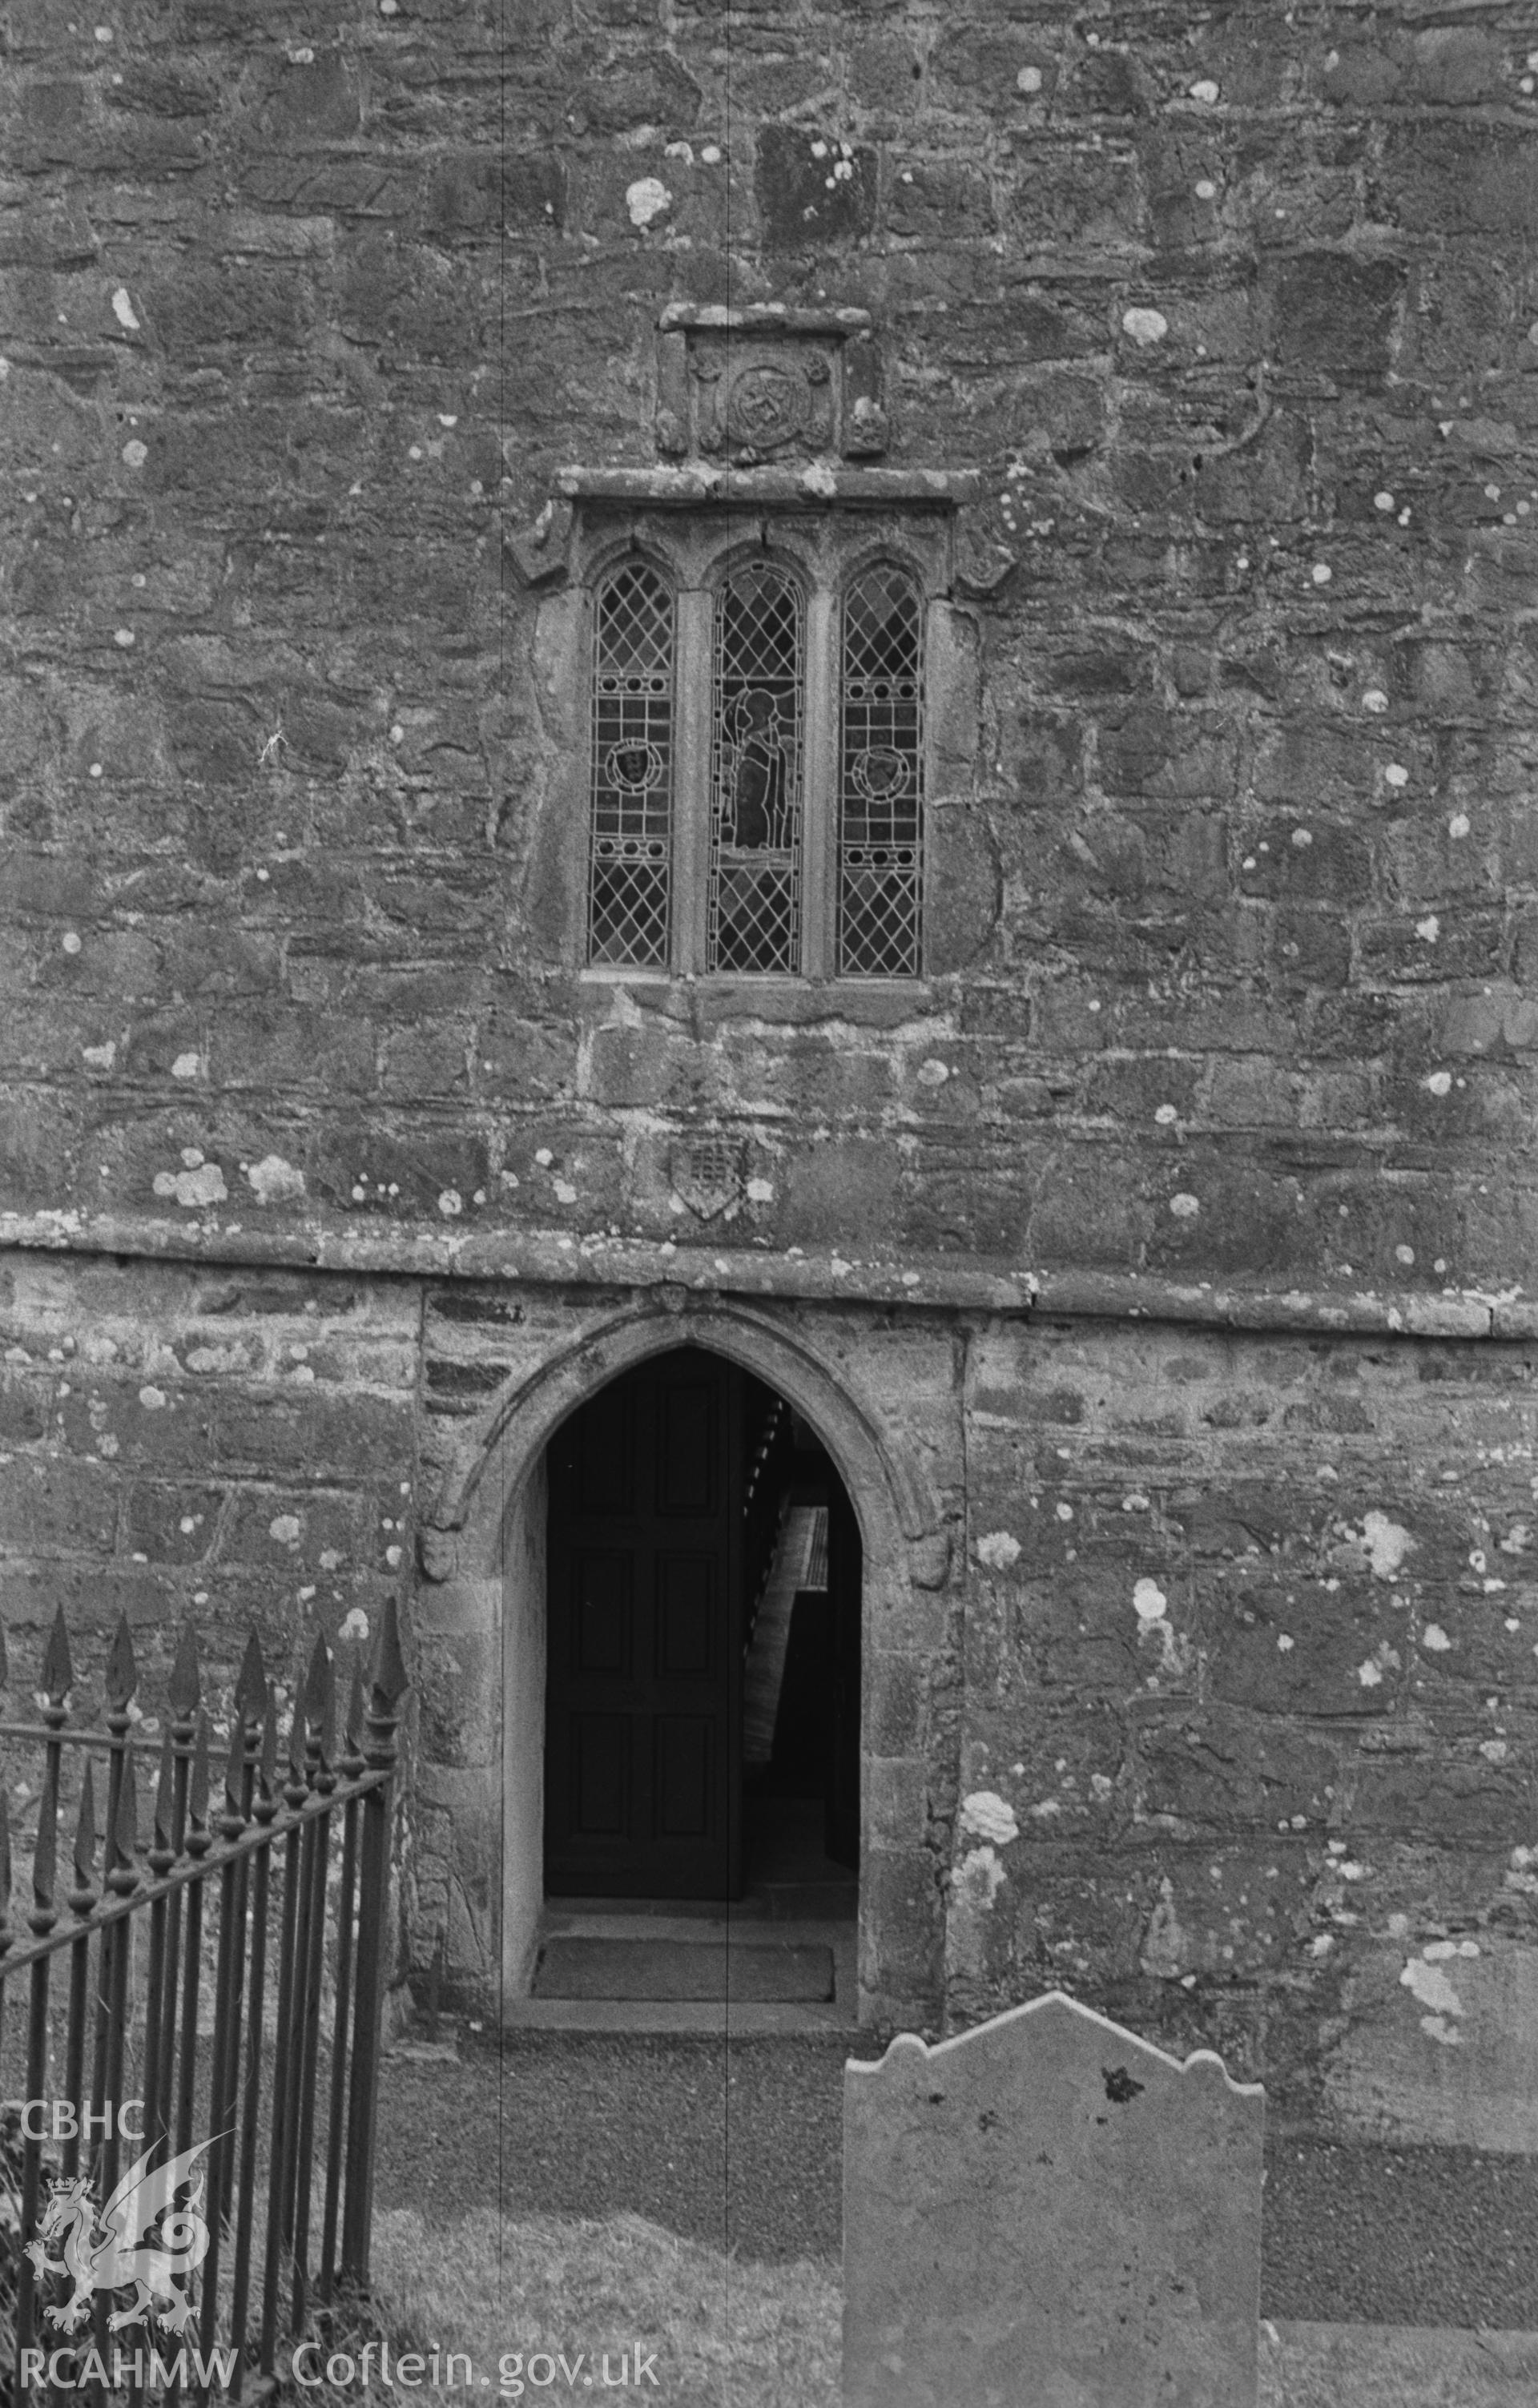 Digital copy of a black and white negative showing west door and window of St Gwenog's church, Llanwenog, at the base of the tower. Photographed in April 1963 by Arthur O. Chater from Grid Reference SN 4937 4552, looking east.